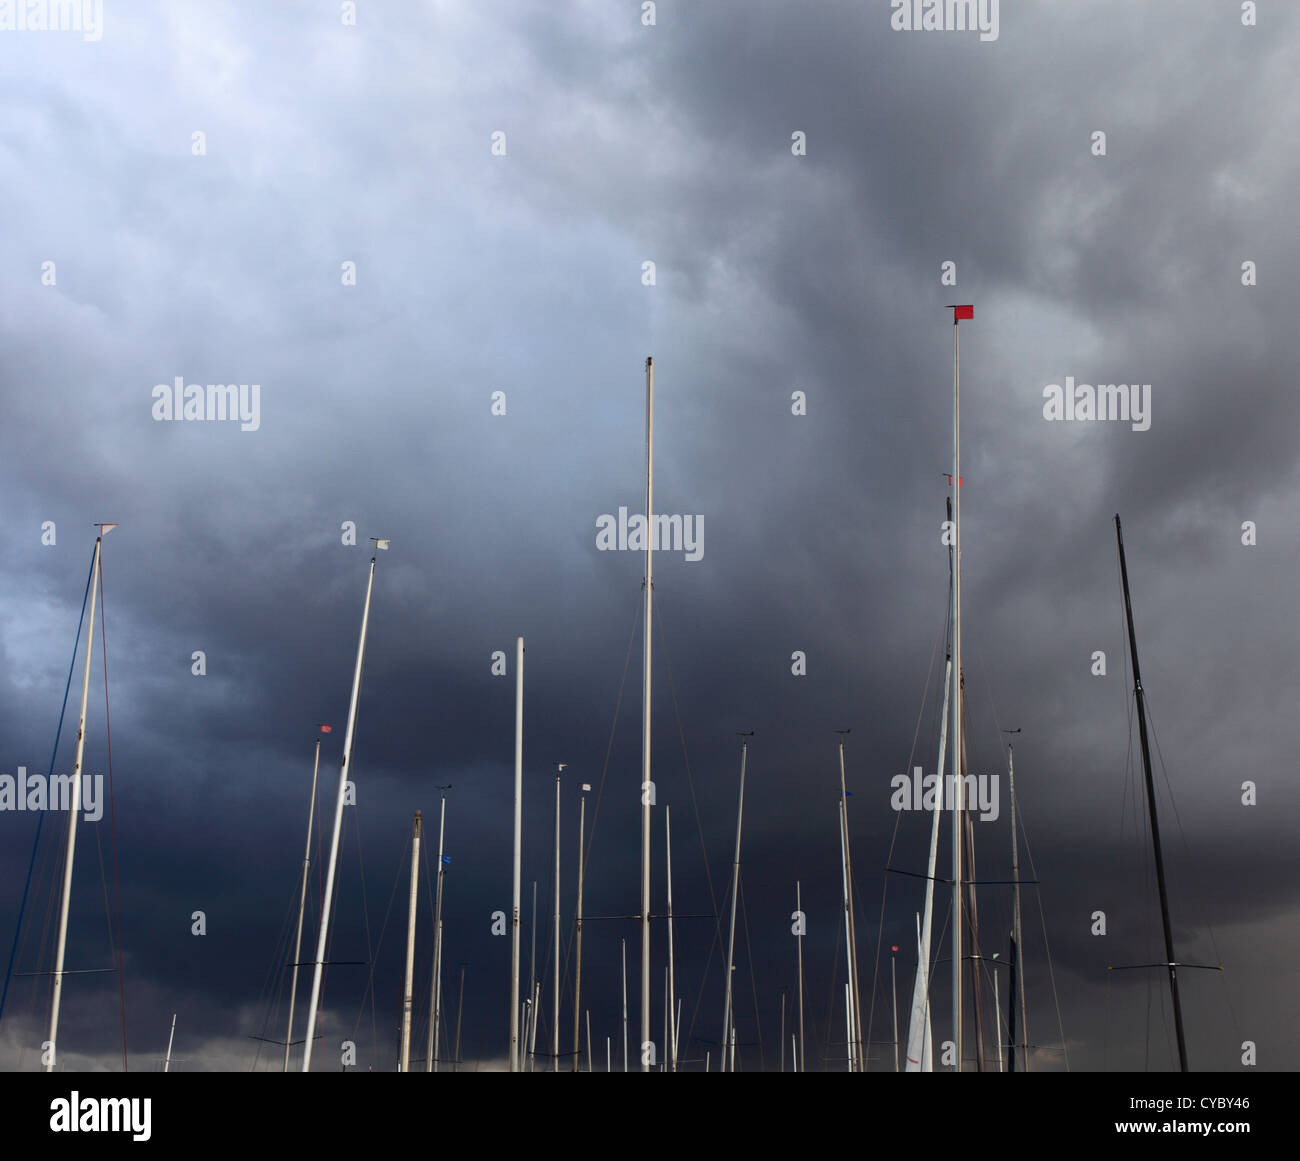 Boat masts against a stormy sky. Stock Photo